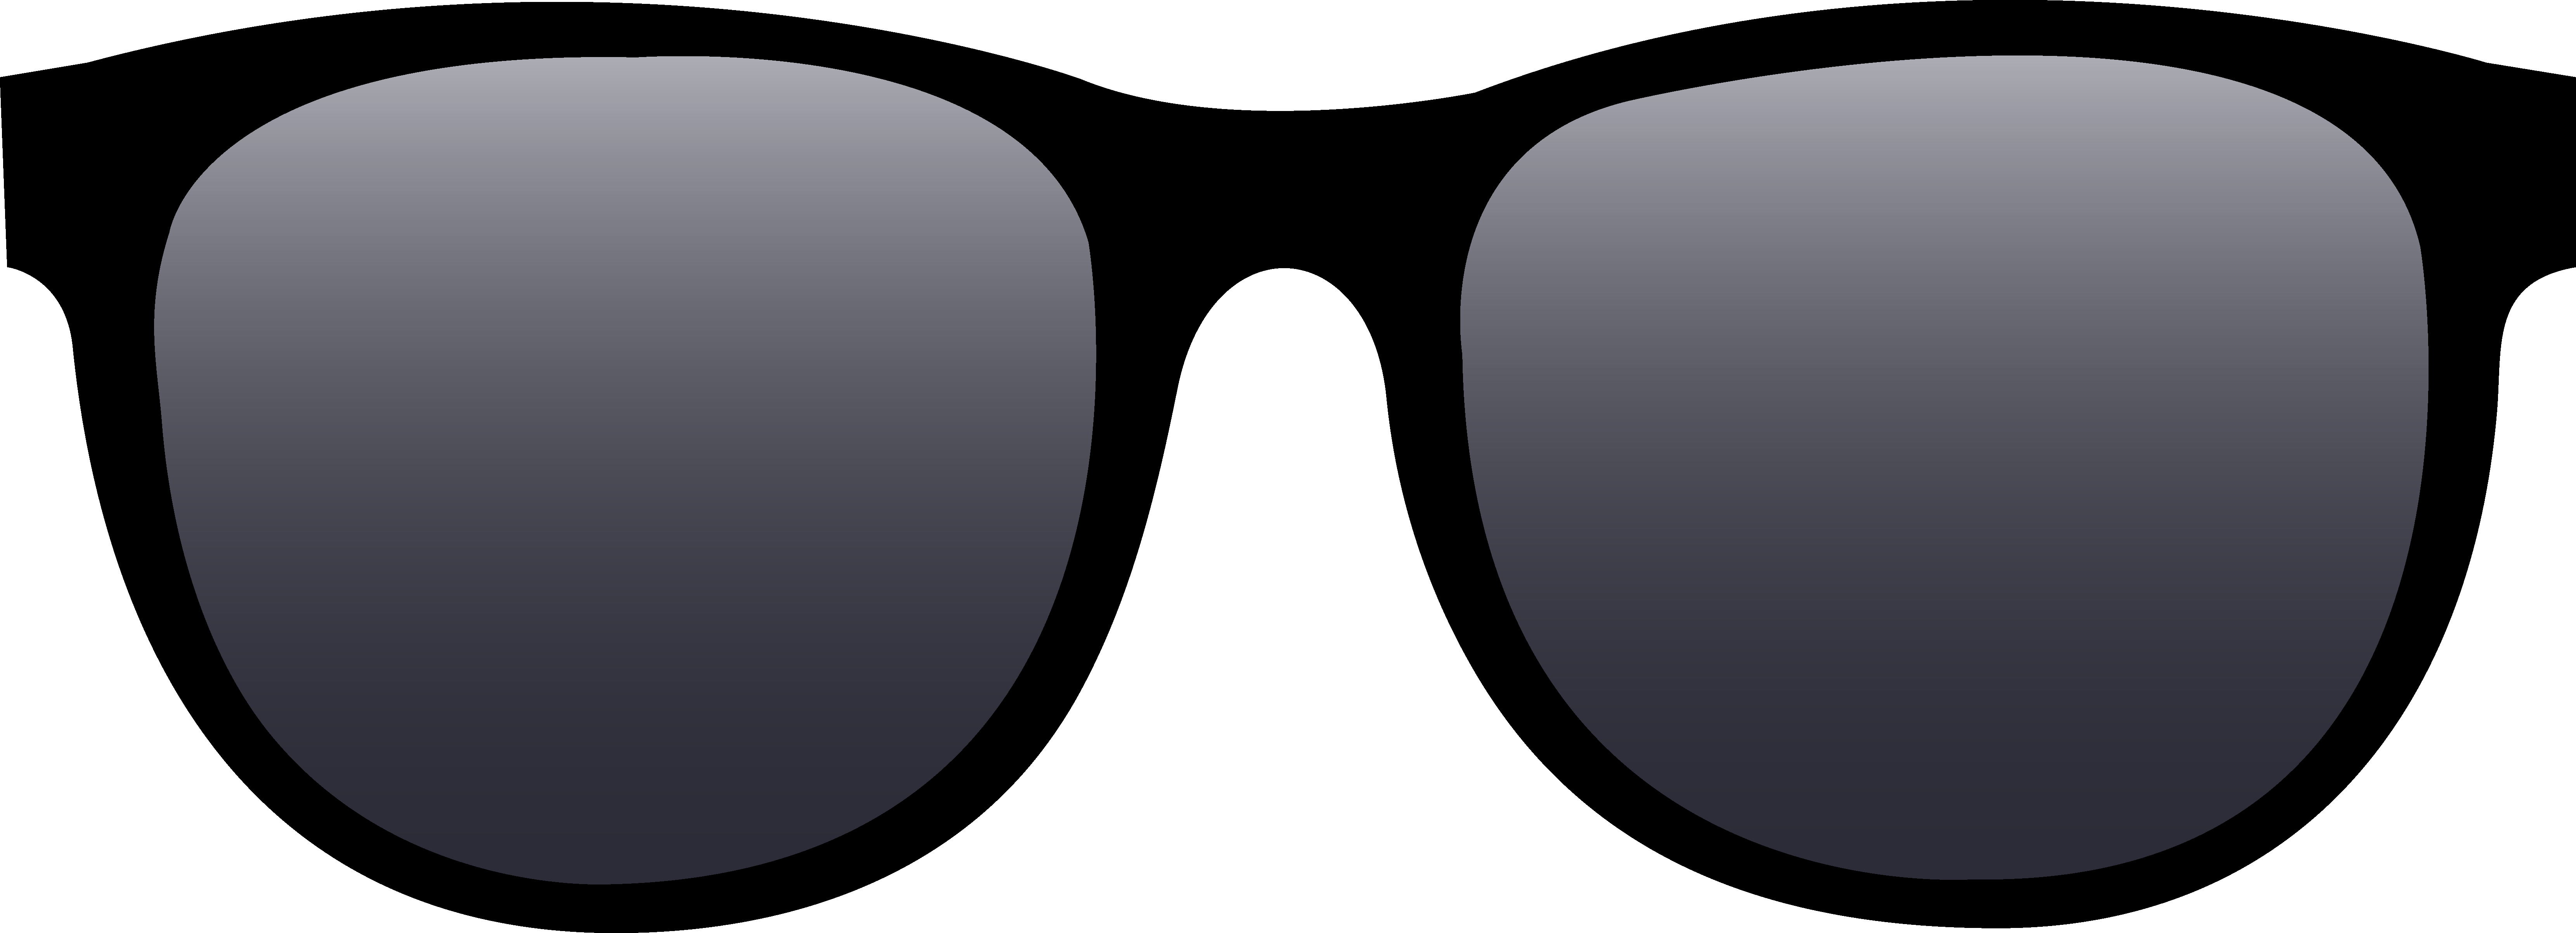 Sunglasses Png Images Clipart